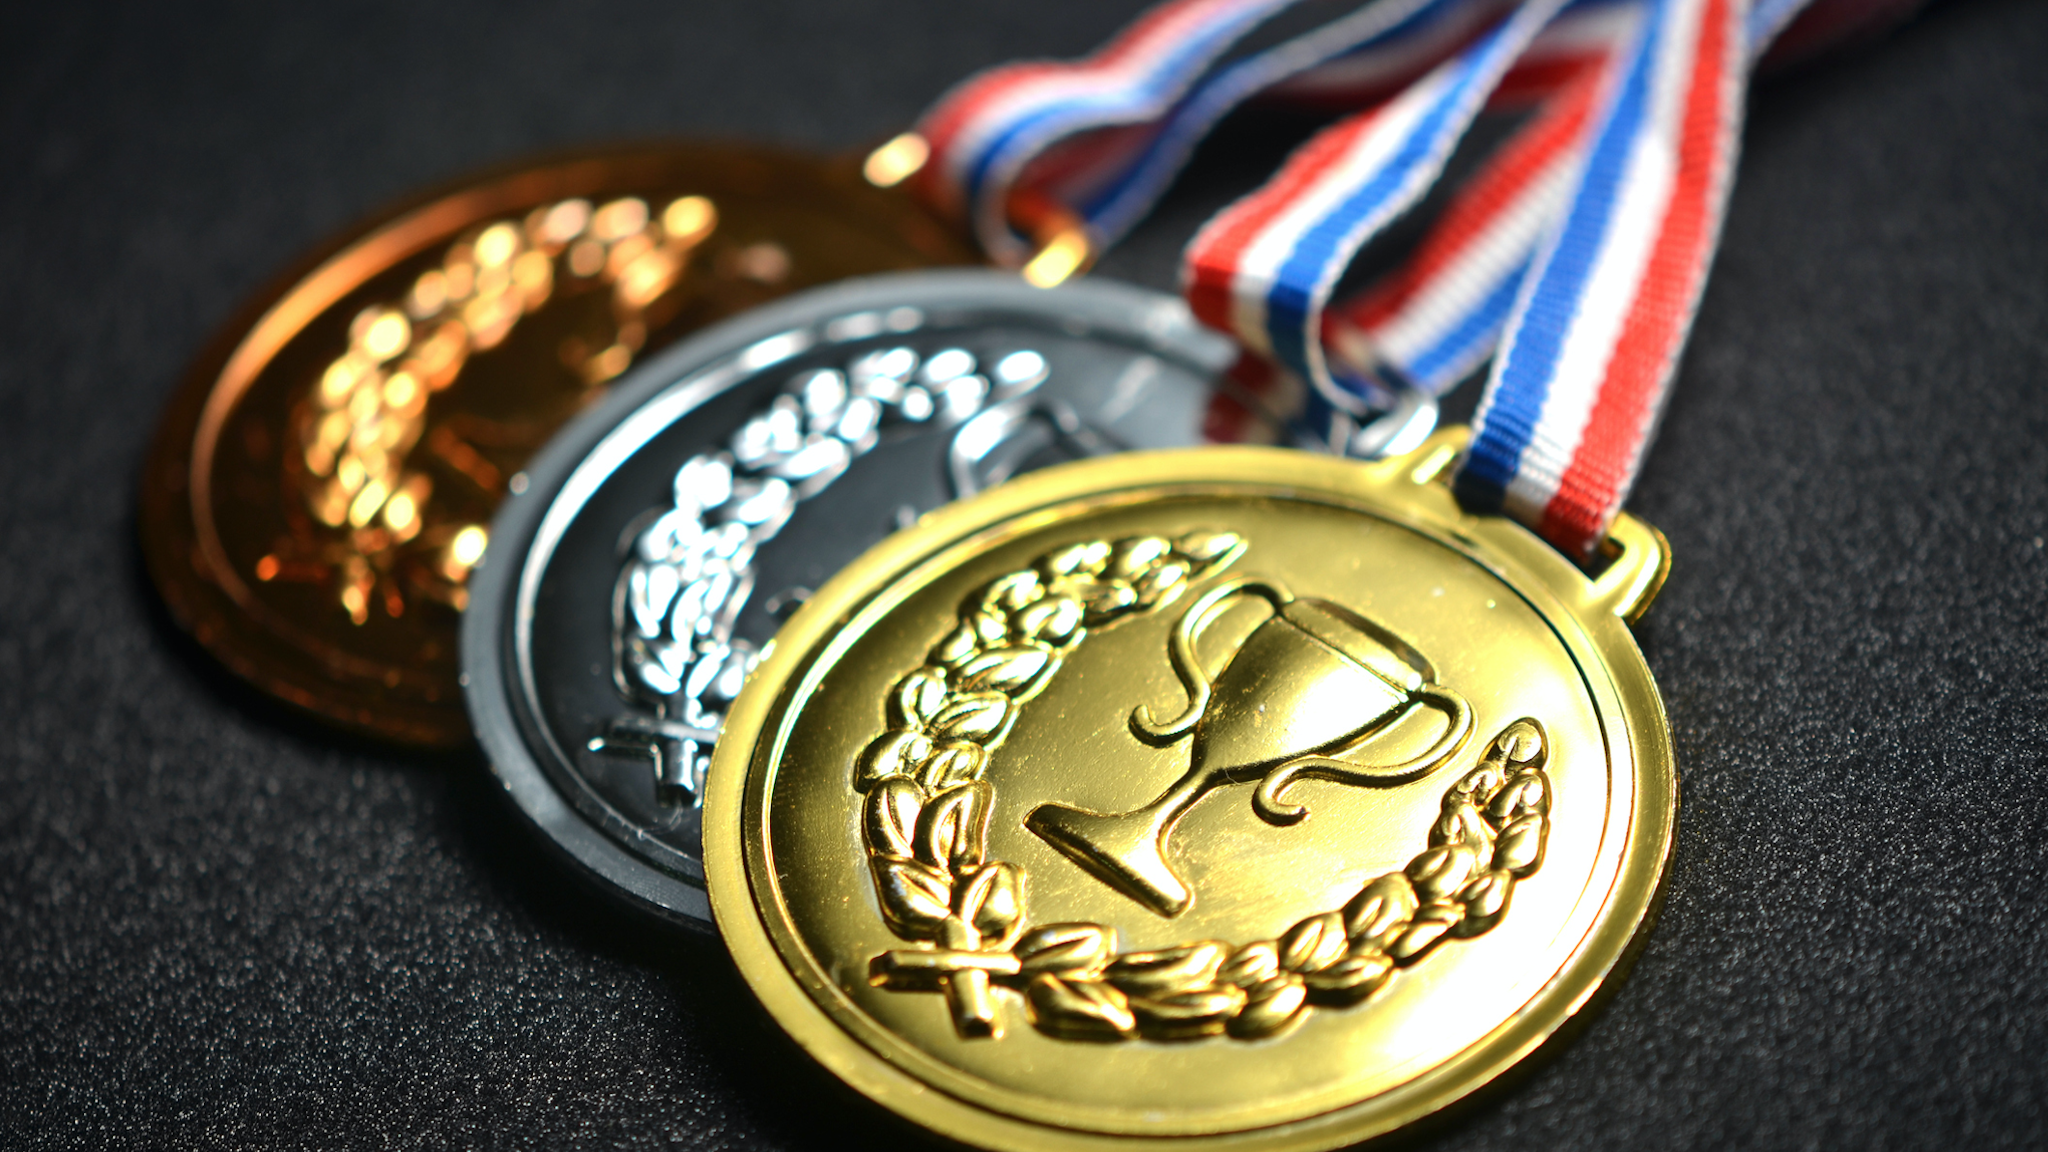 Close-Up Of Medals On Black Table - stock photo